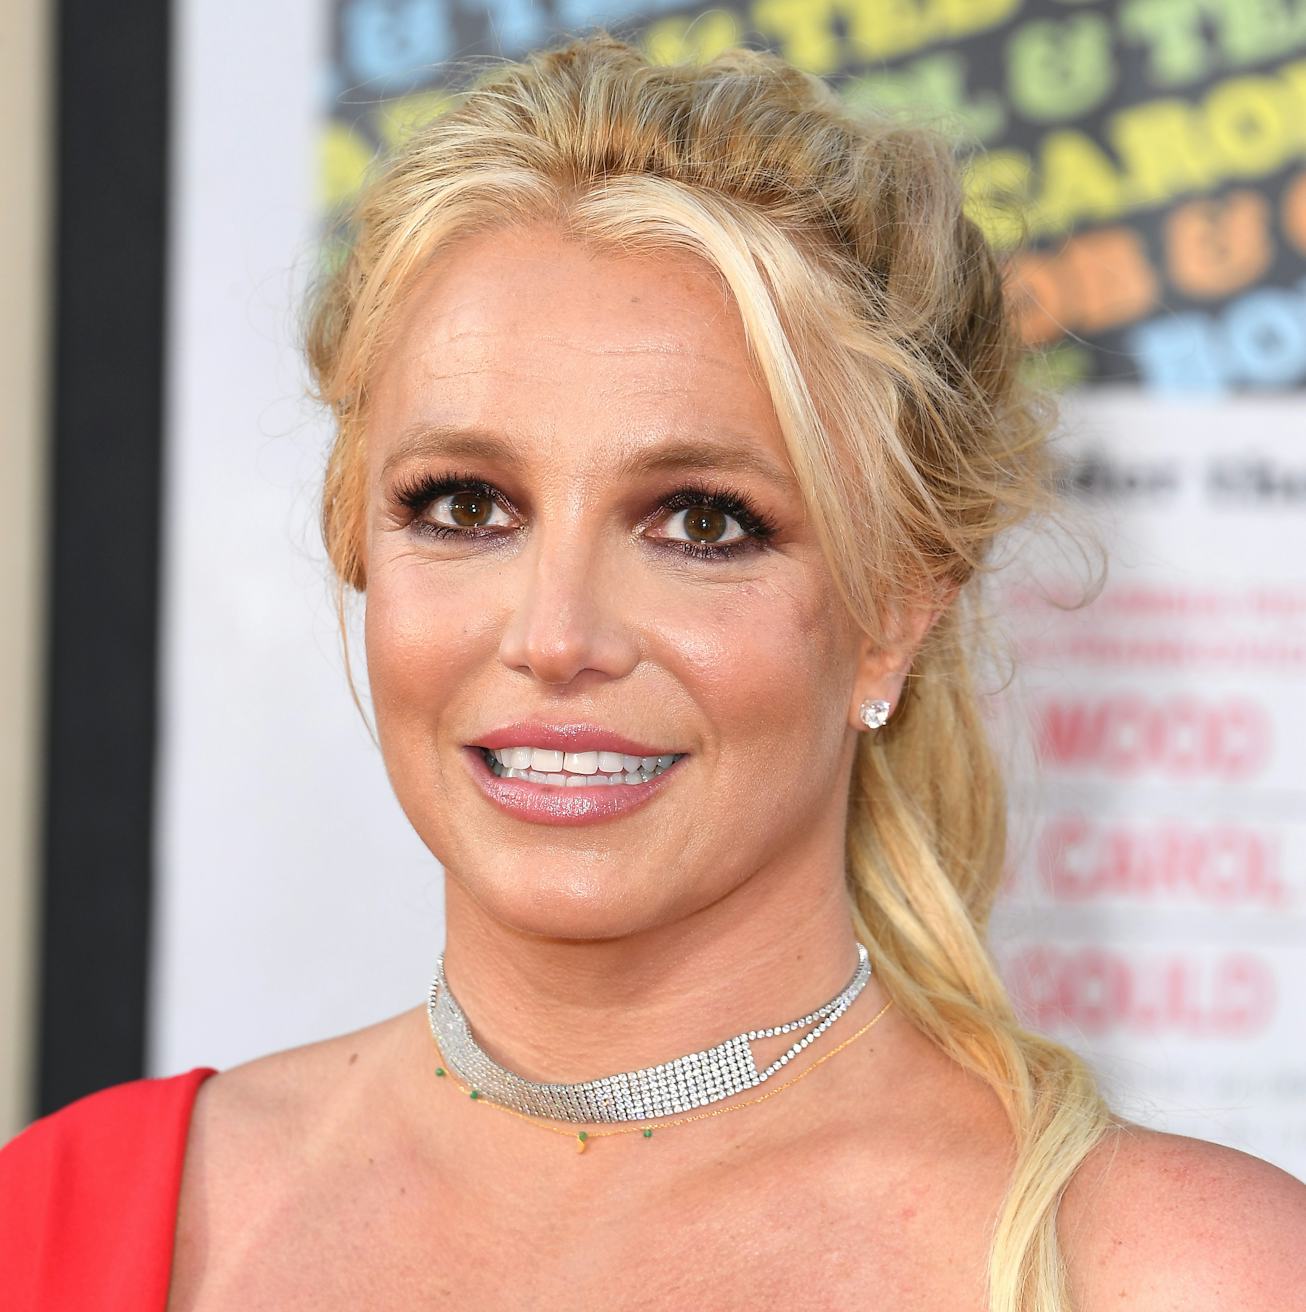 Celebrities are speaking out in support of Britney Spears.